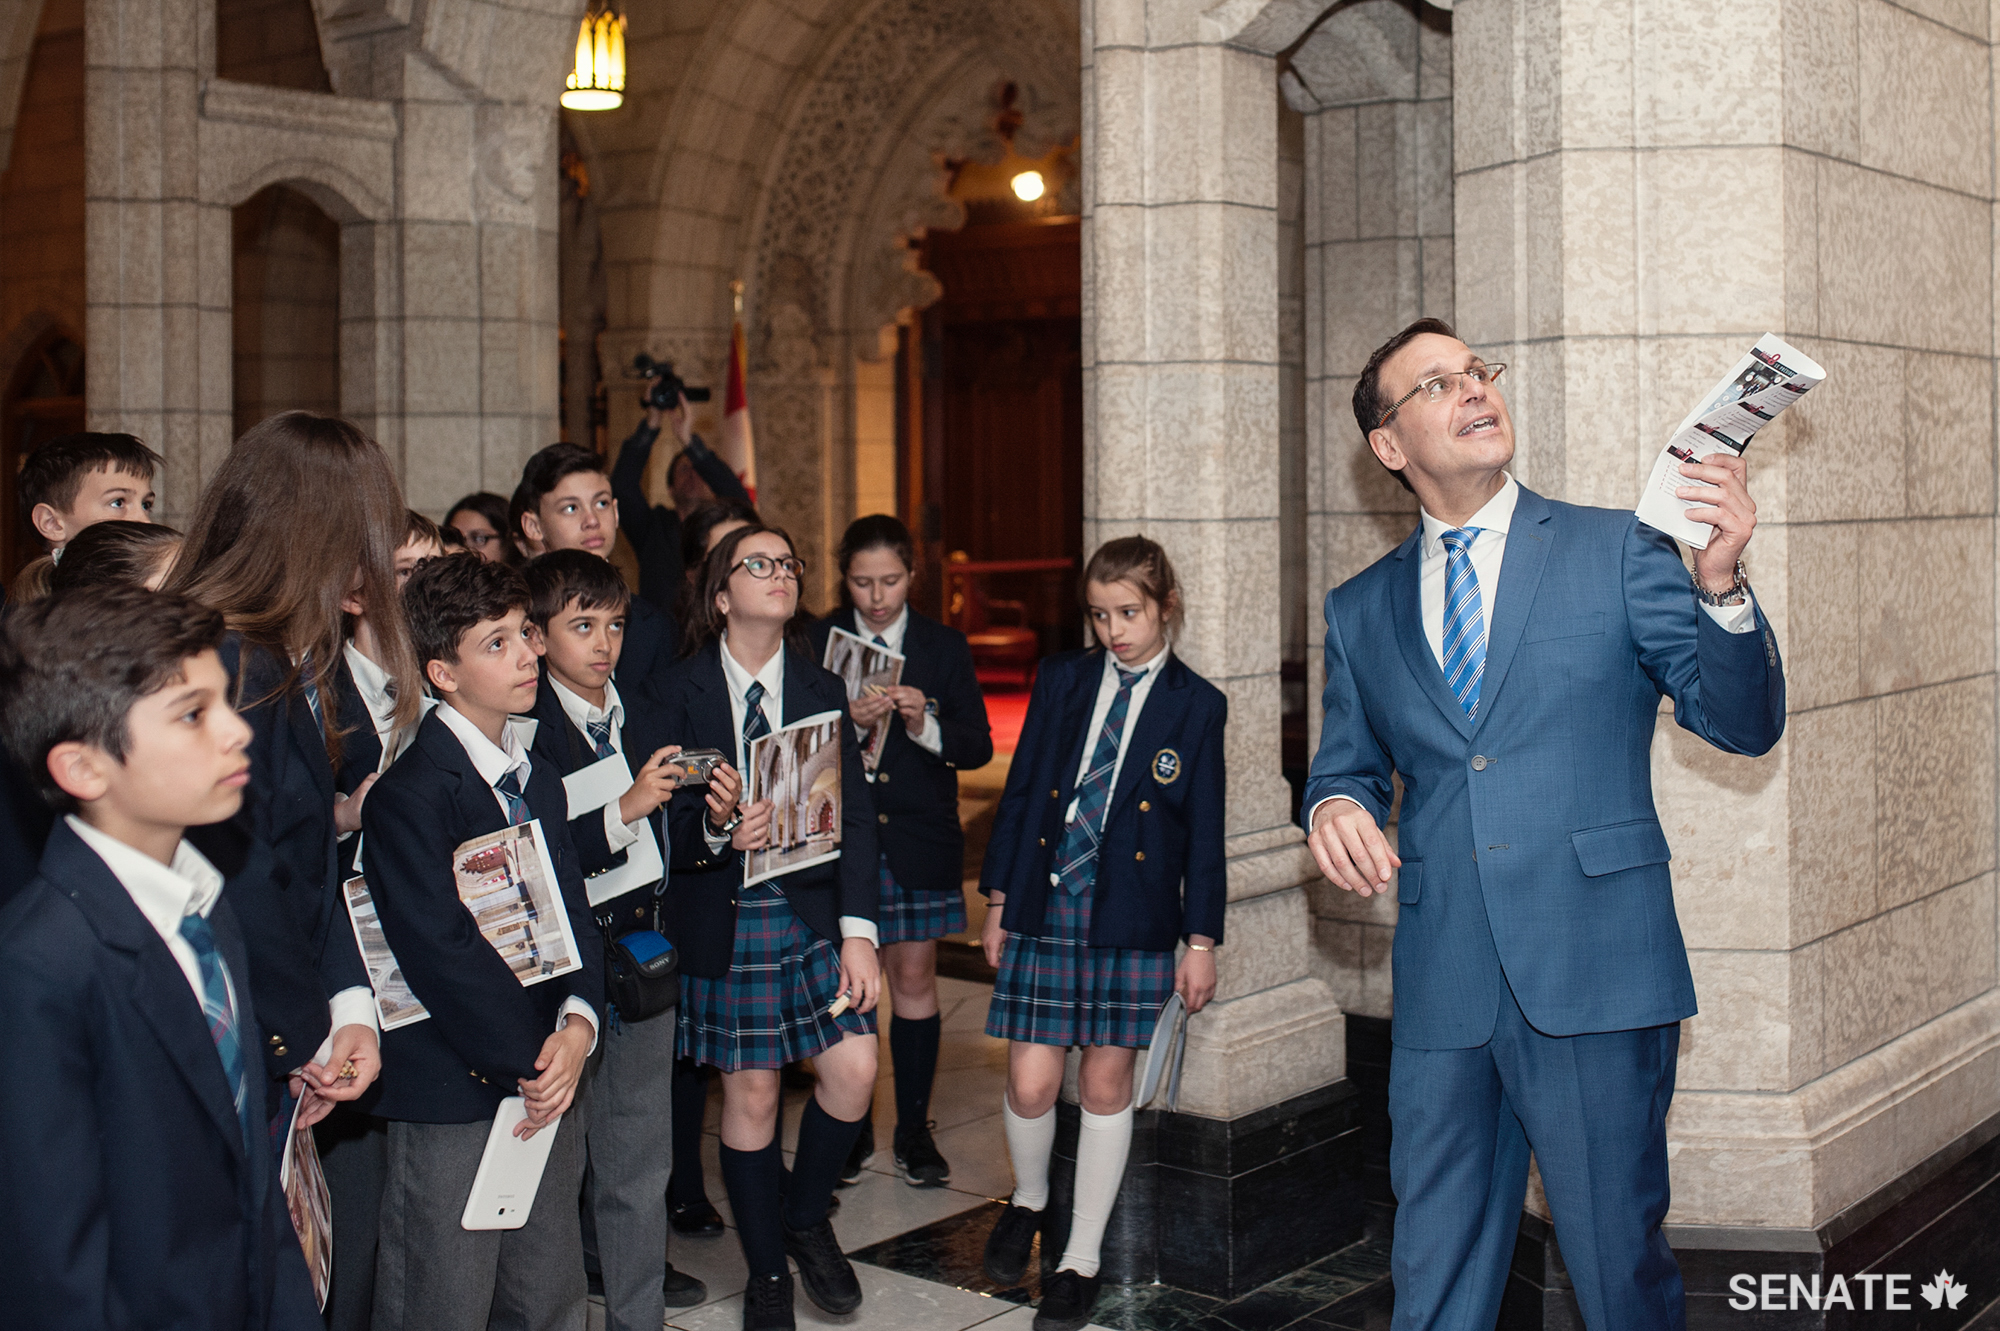 Pointing out the portrait of the King George VI, who overcame a stammer to lead the Commonwealth during the Second World War, Senator Housakos reminds students that they can do anything they put their minds to.